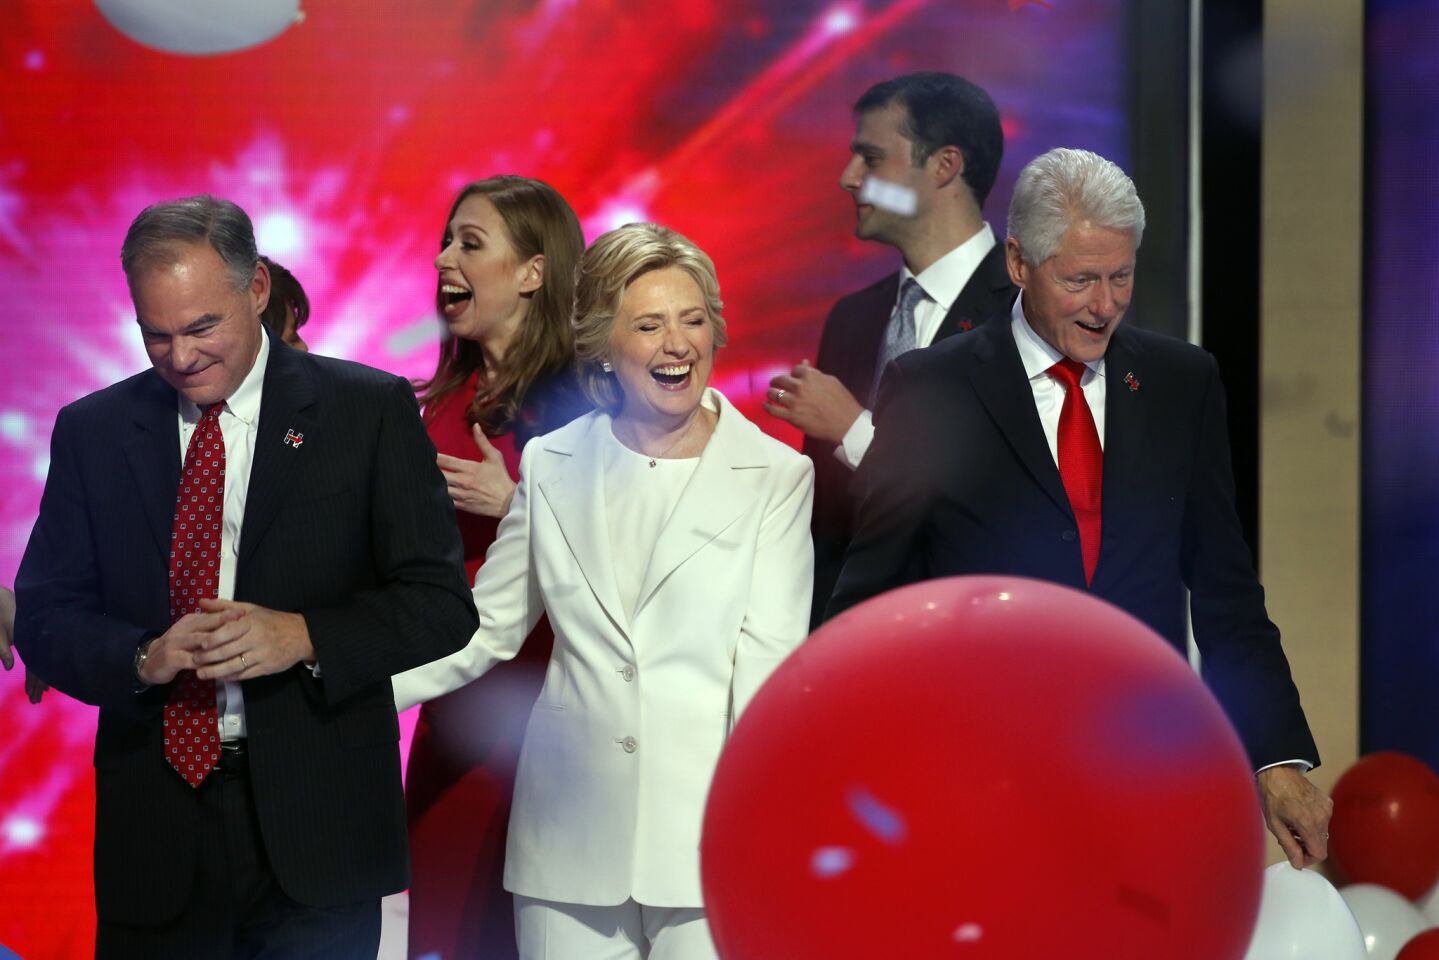 Hillary Clinton becomes the first woman to win the nomination for President for any party in America. Celebration begins after she finished her address to the delegation on the final night of the Democratic National Convention in Philadelphia.